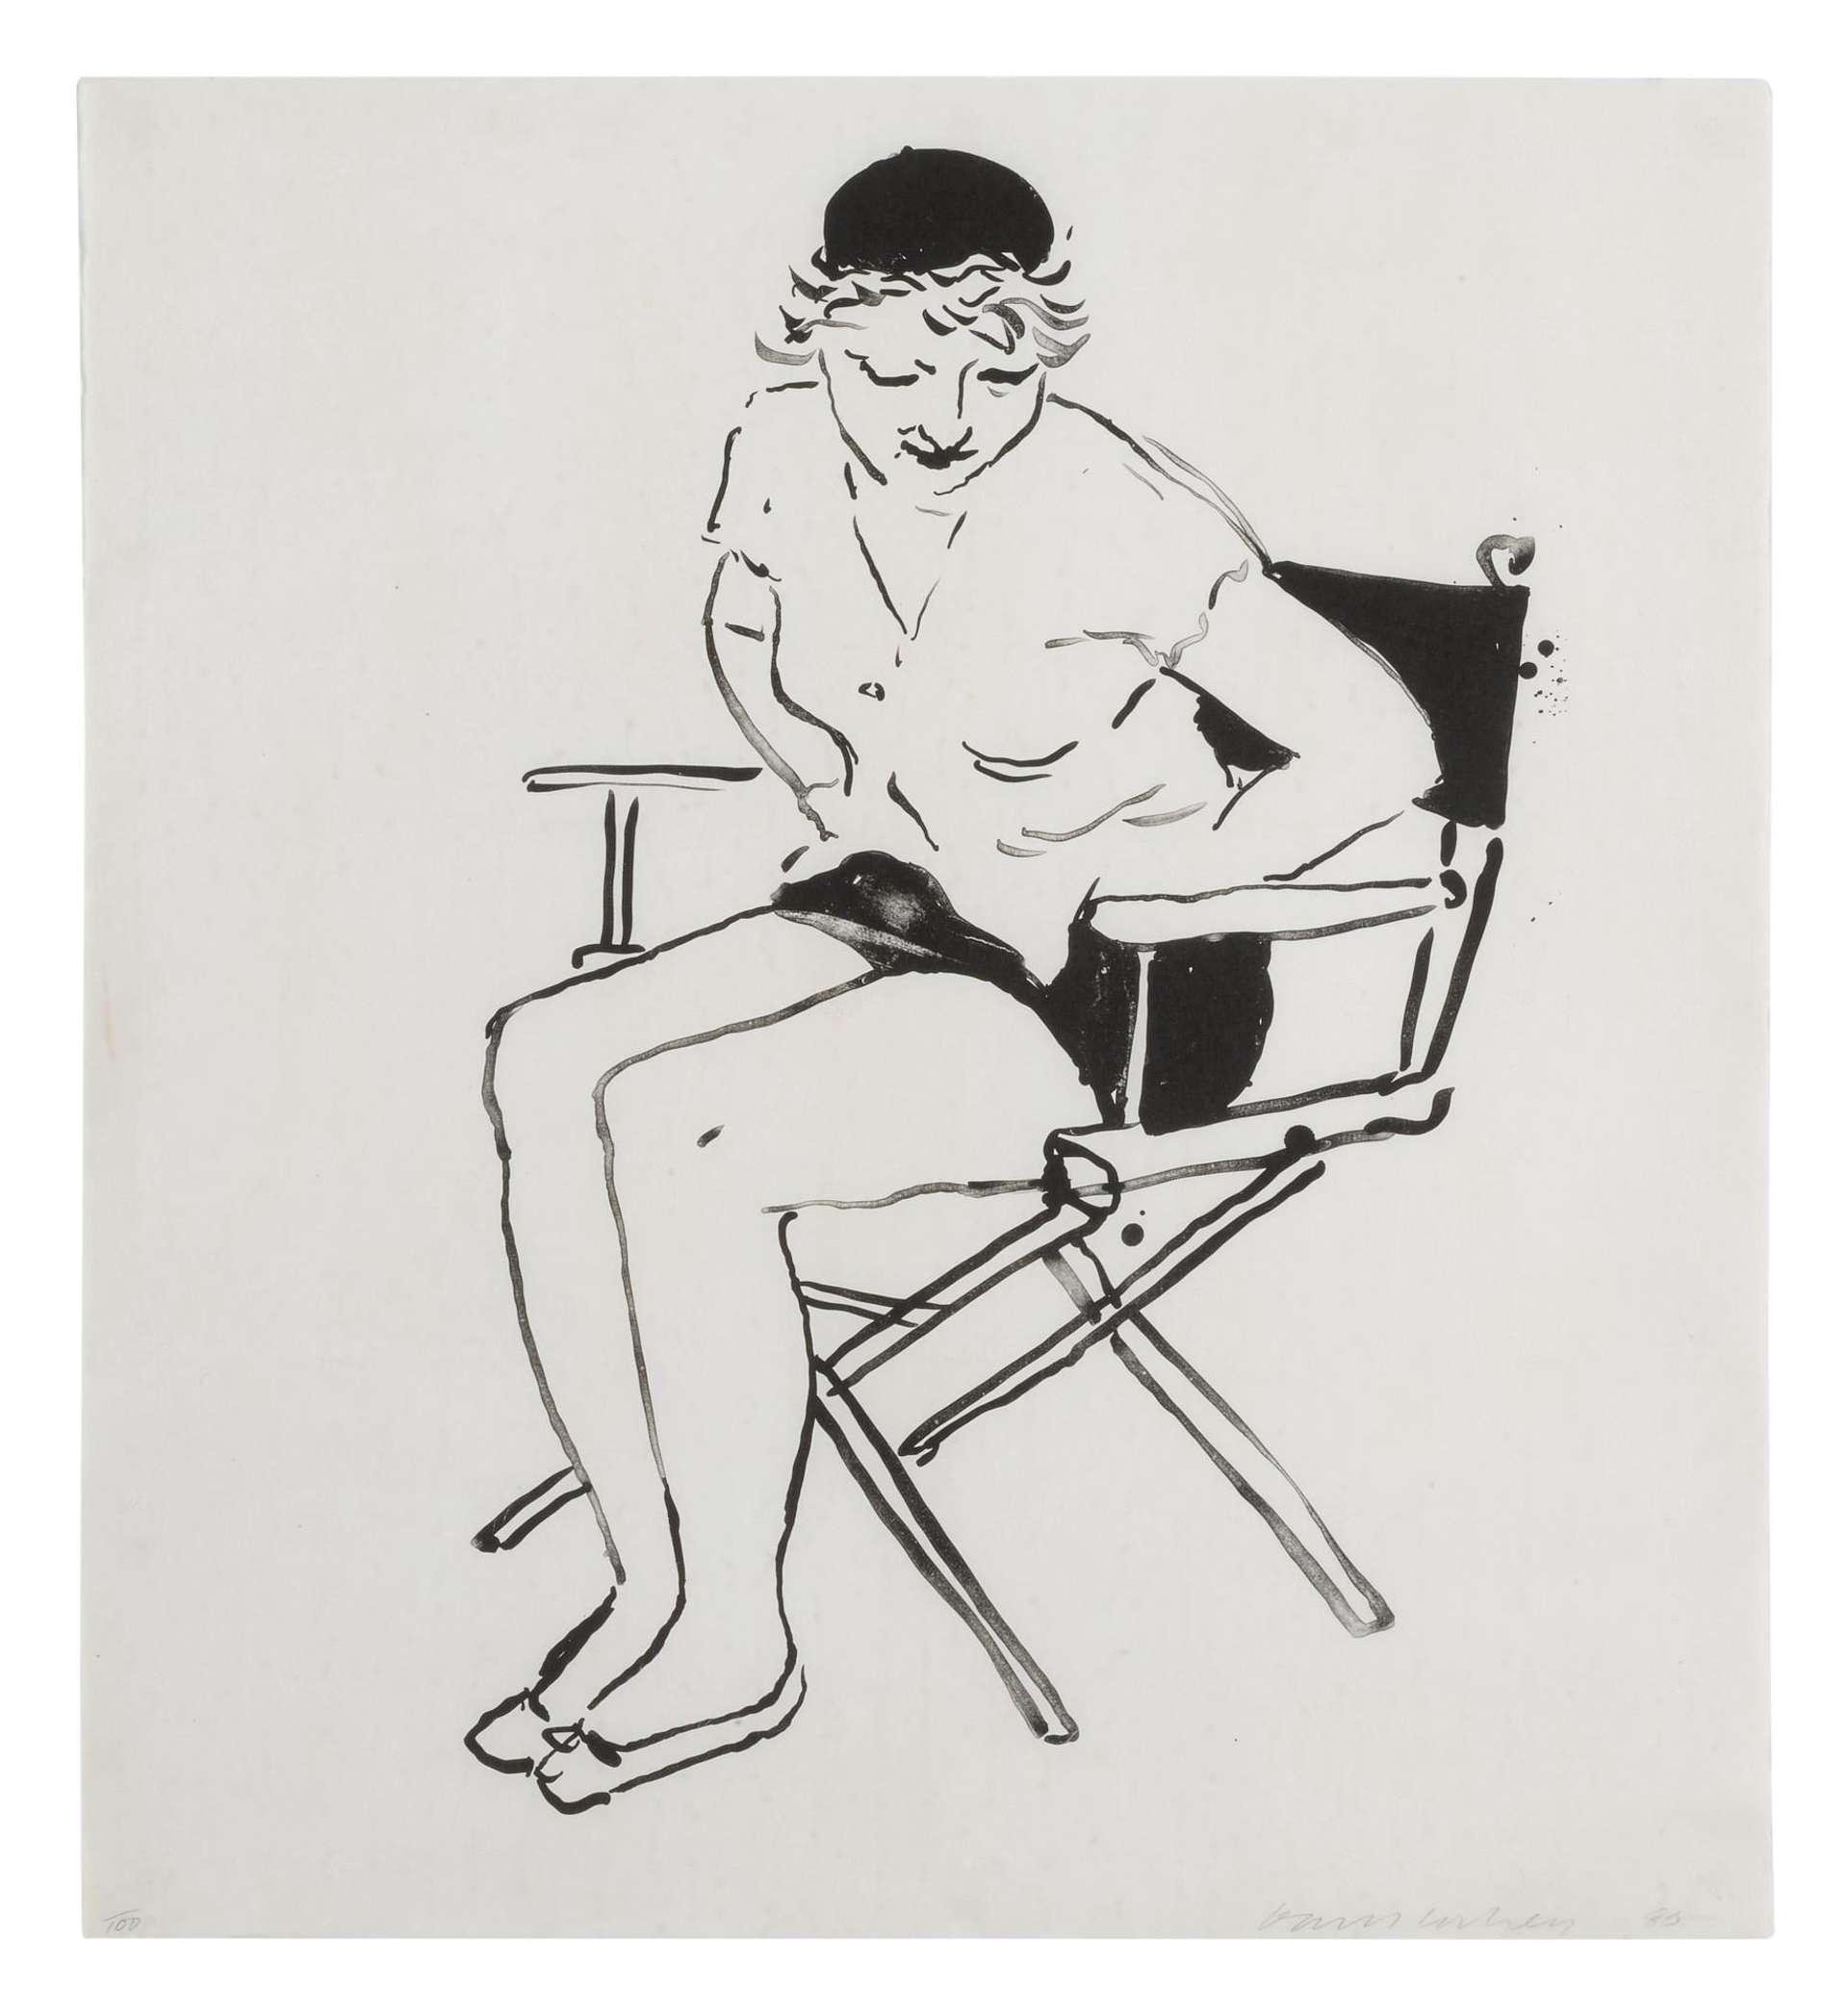 Celia In The Director’s Chair shows the designer and model sat forwards in the classic style of chair, her eyes downturned and her hands in her pockets as if she might be just about to get up. She wears a tight black skirt that reveals her bare legs and a plain blouse, with a black beret on her head.